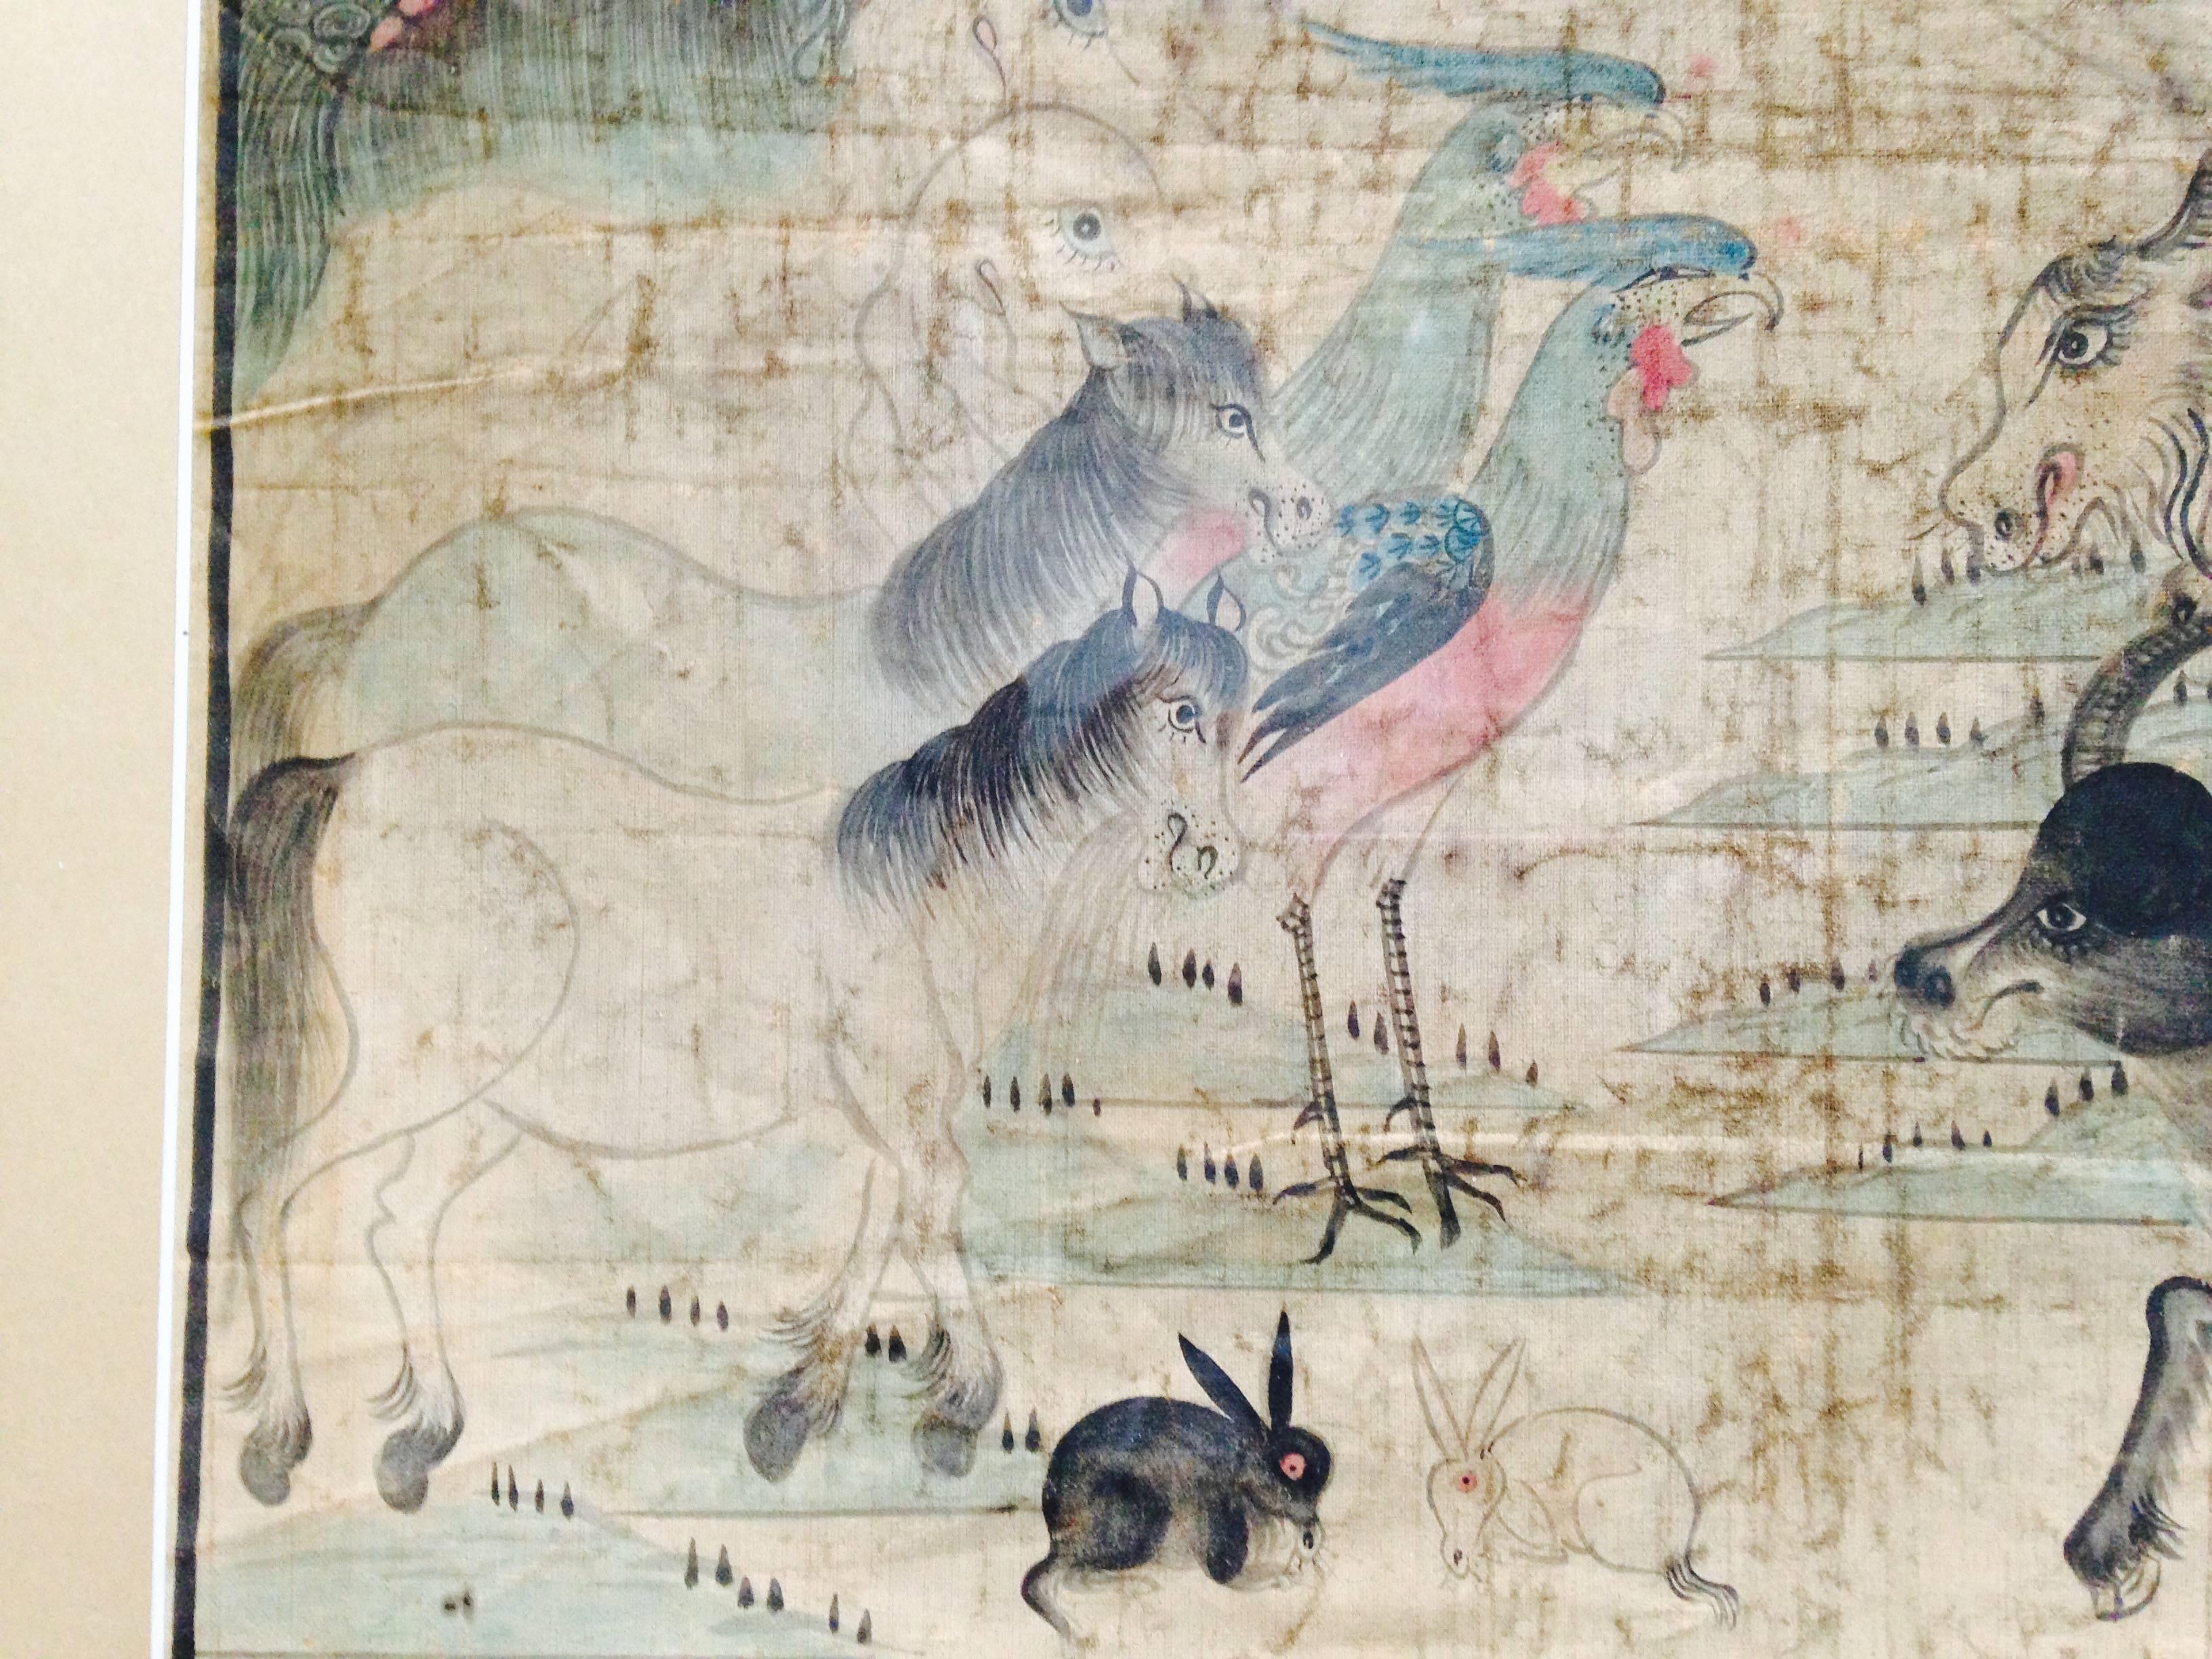 China, an early painted silk panel of Noah’s Ark, frame: 54cm, 21.5” high and 54cm, 21.5” wide, site: 39cm, 15.75” high and 39cm, 15.75” wide, Qing dynasty, 18th-19th century.

The painted textile panel drawn in muted red, blue and black pigments